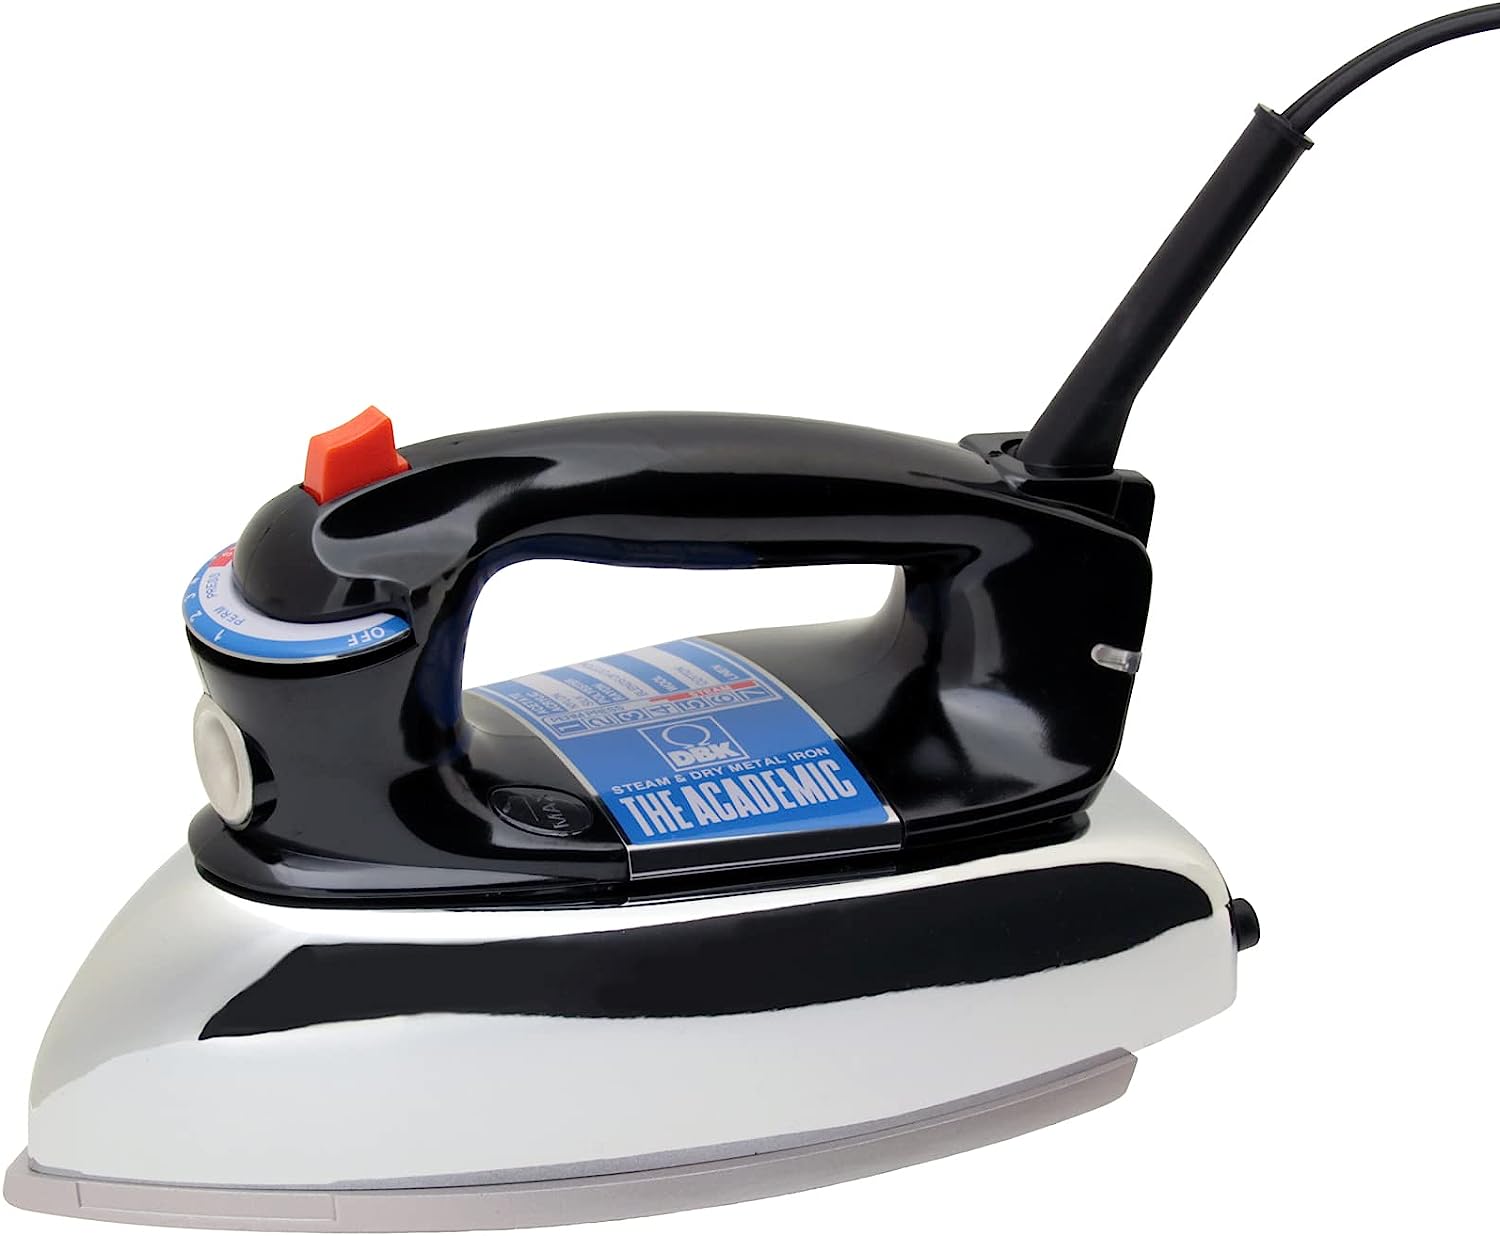 DBK Steam & dry iron with cord ”THE ACADEMIC” (pcs)